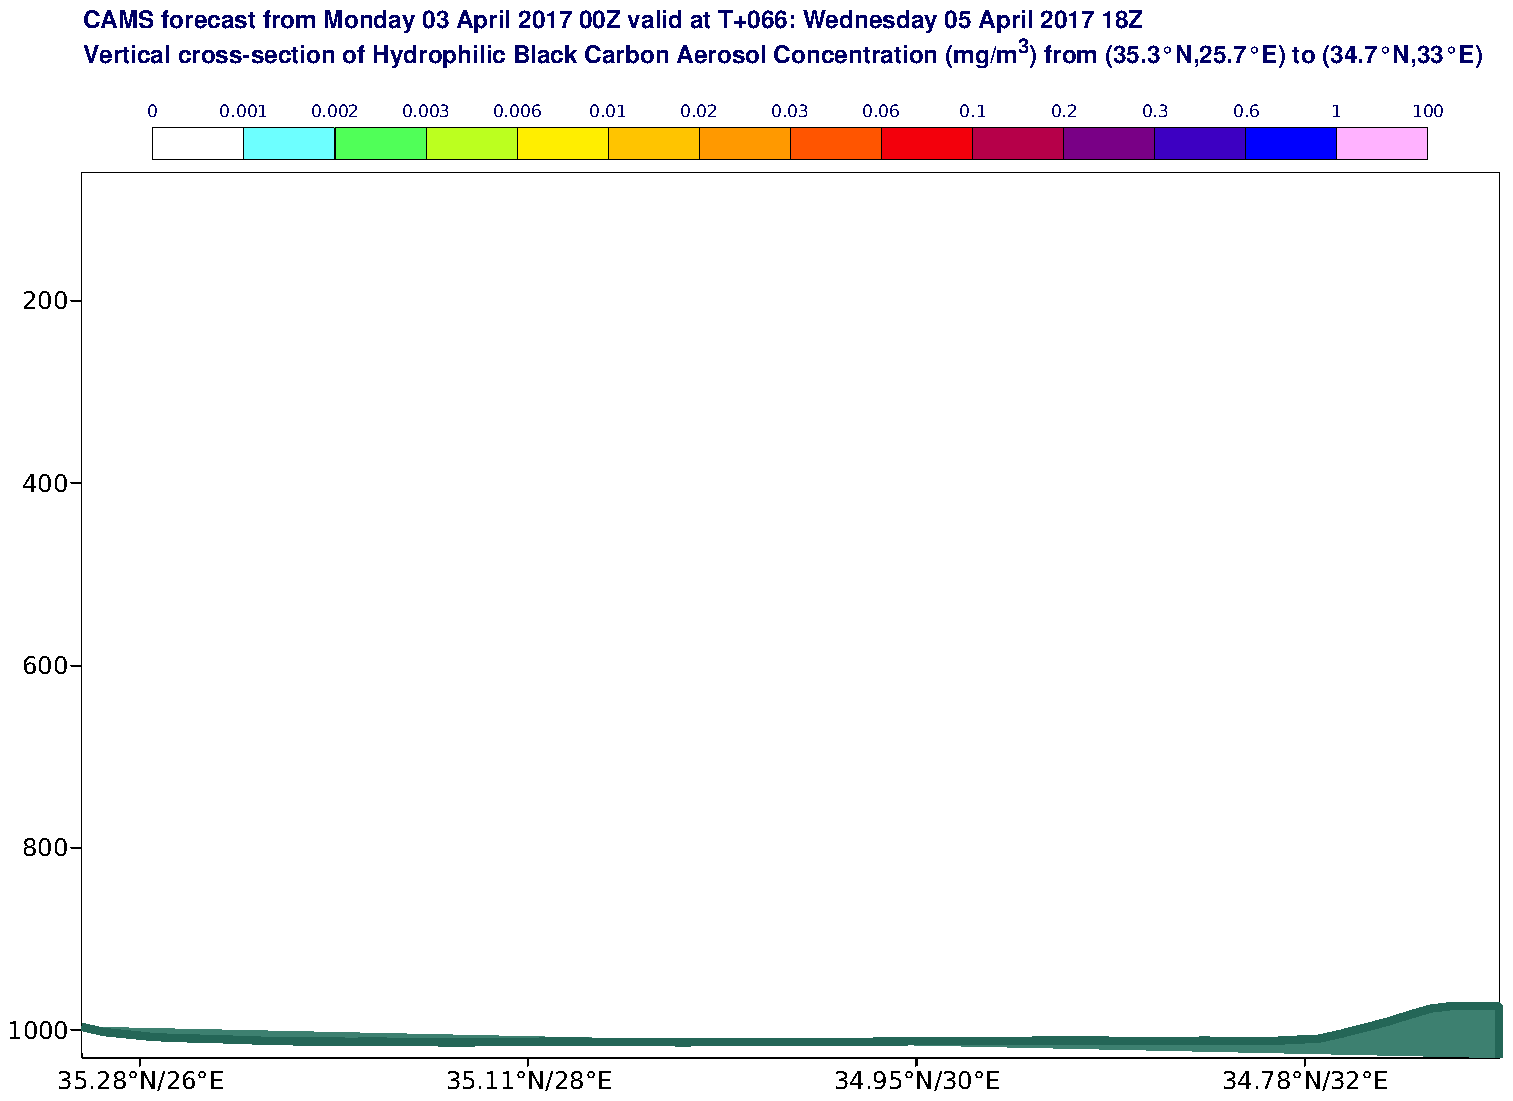 Vertical cross-section of Hydrophilic Black Carbon Aerosol Concentration (mg/m3) valid at T66 - 2017-04-05 18:00